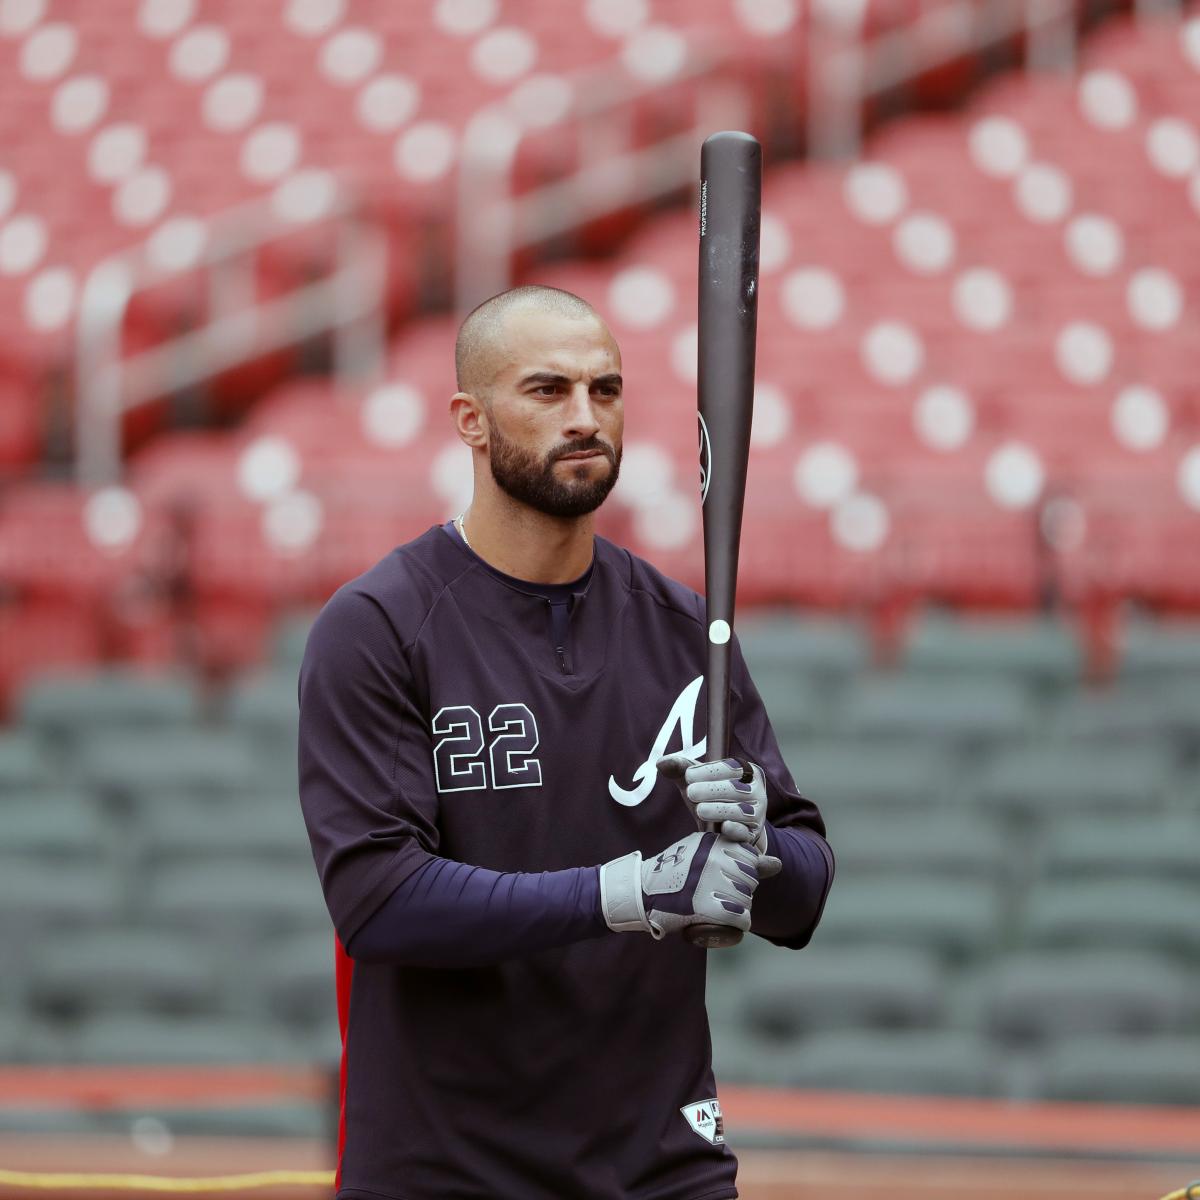 Braves' Markakis: Everyone on Astros `deserves a beating